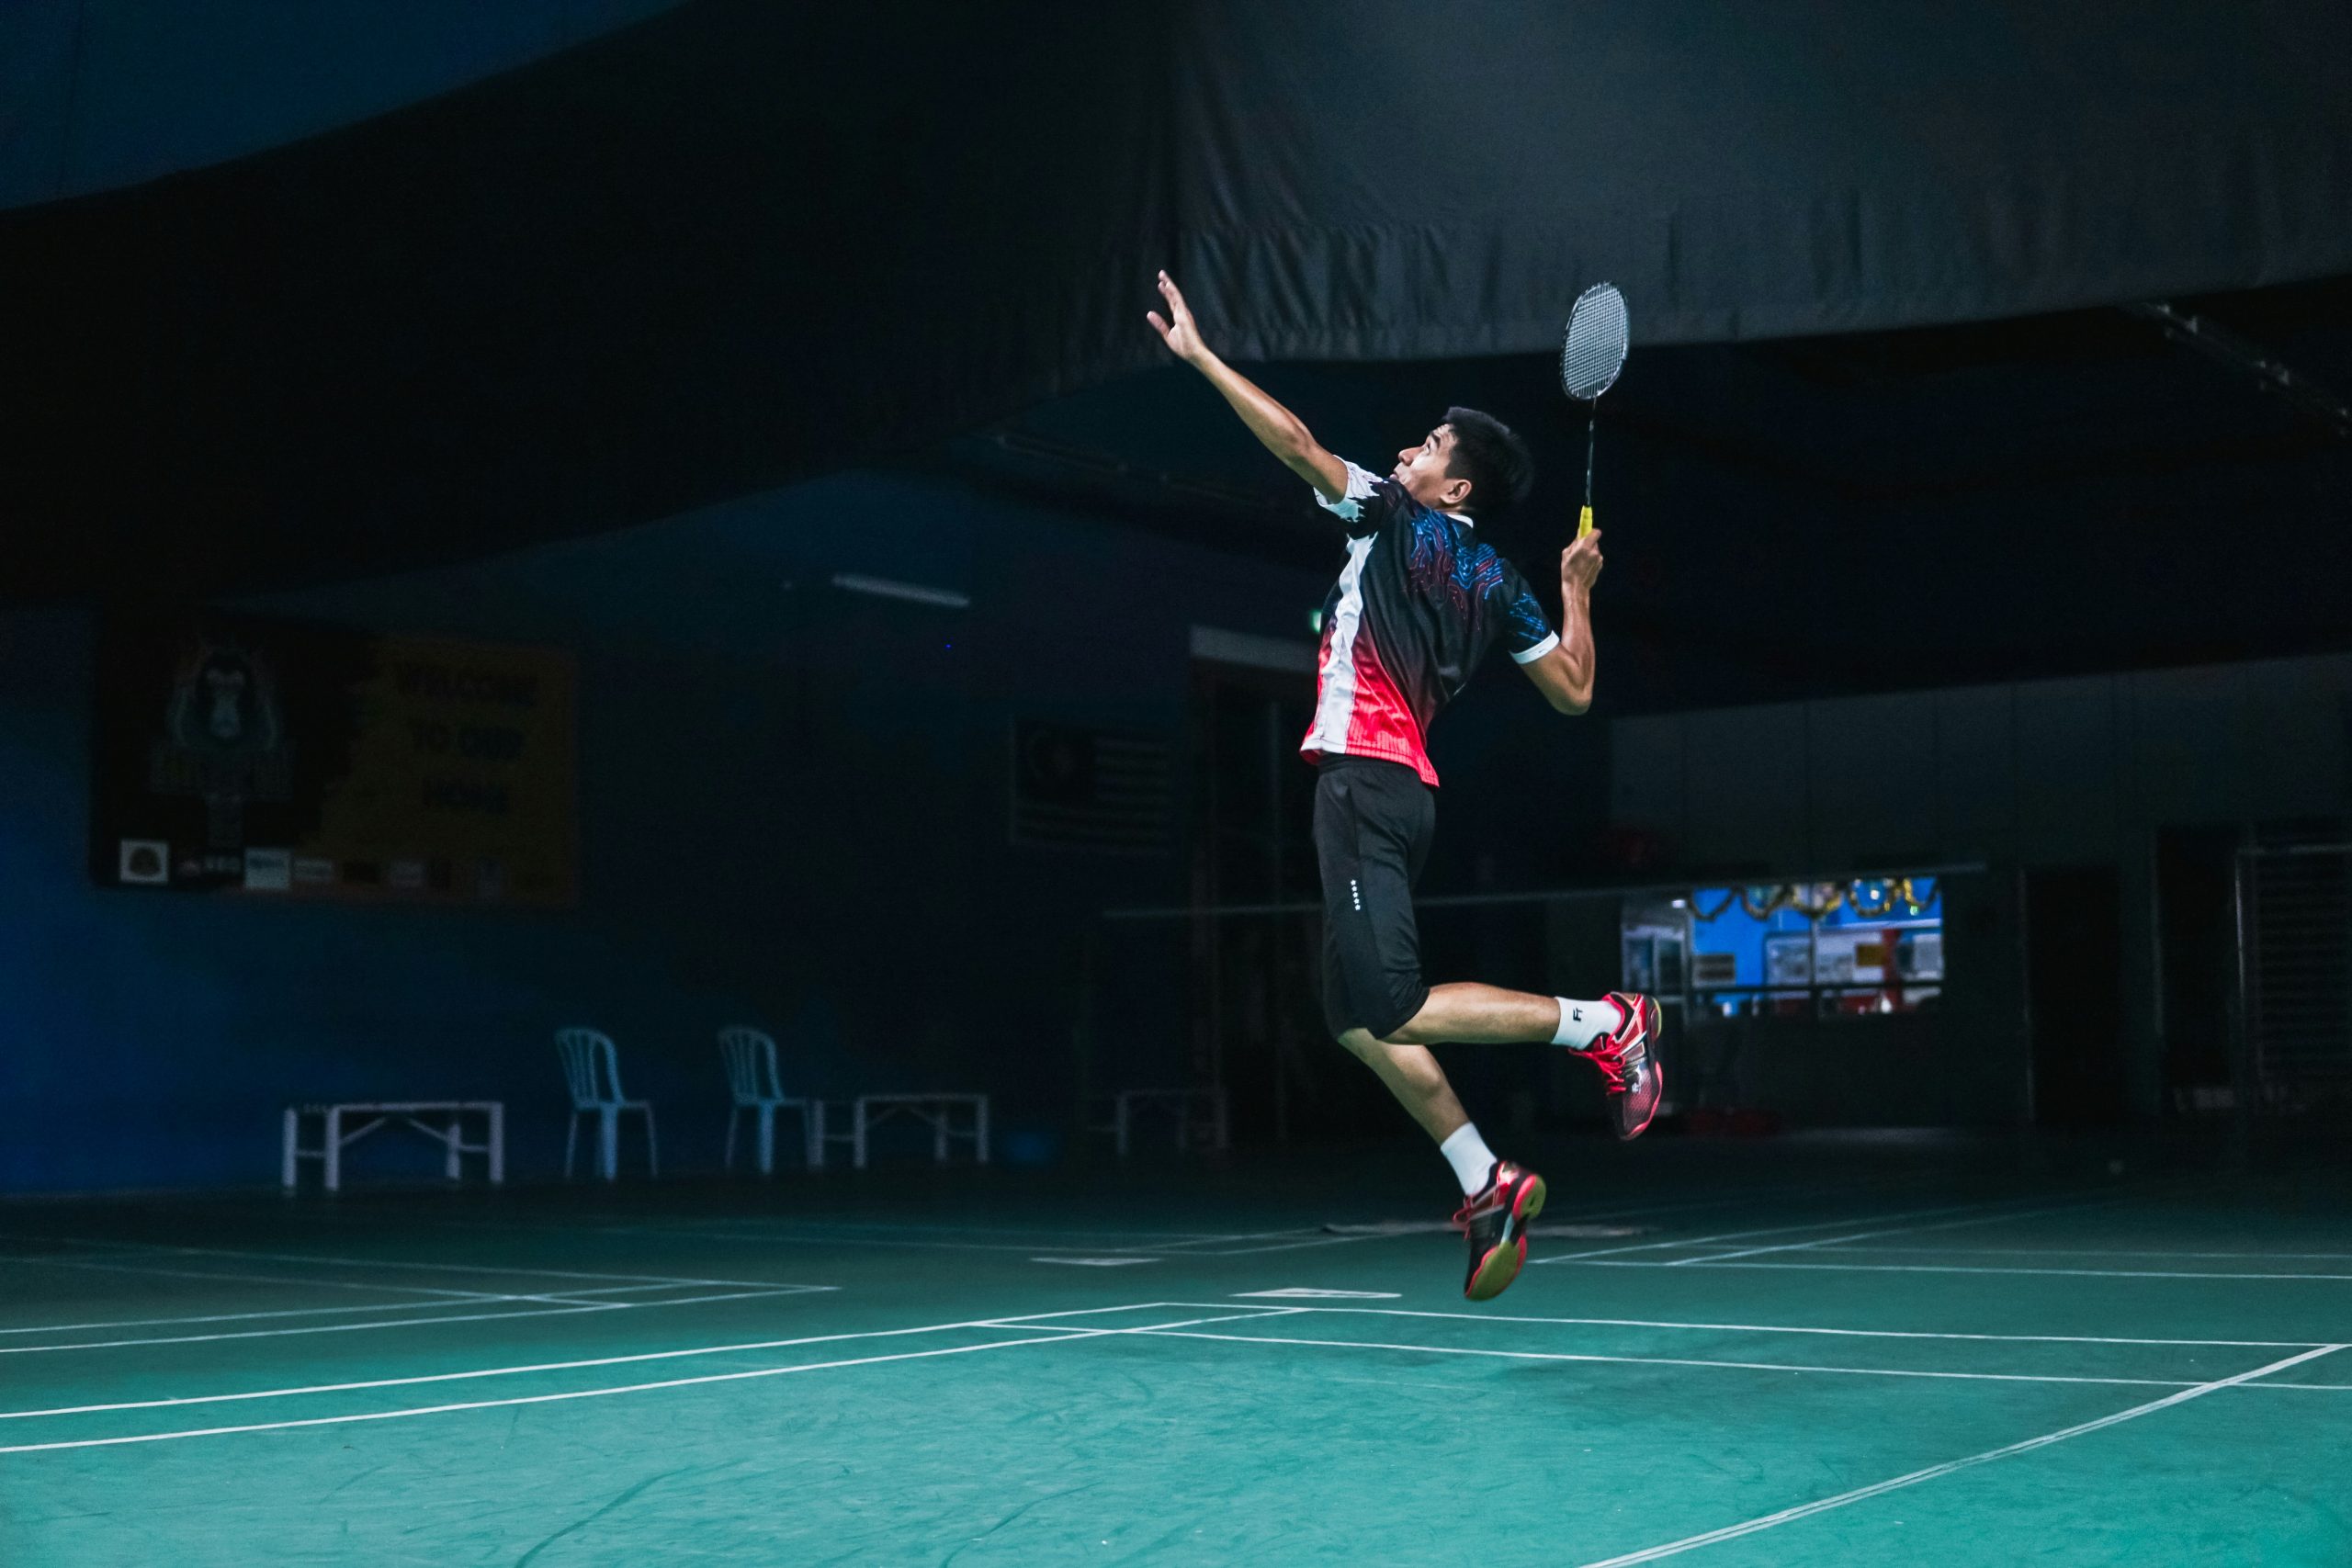 What Is A Backhand Drop In Badminton?